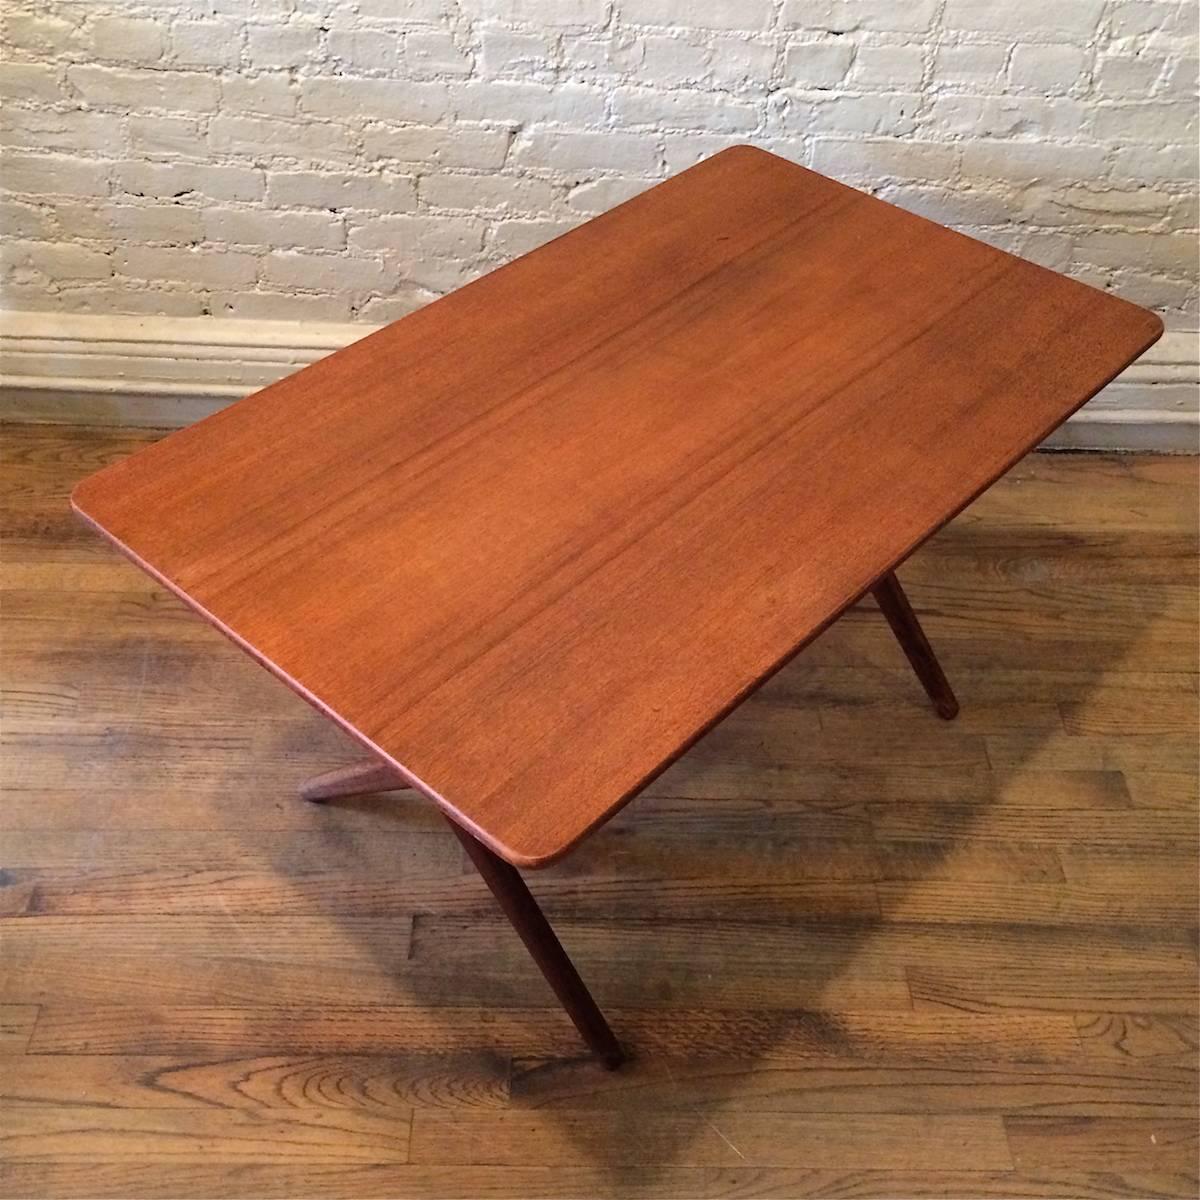 Teak and Brass Occasional Table by Hans Wegner for Andreas Tuck 1